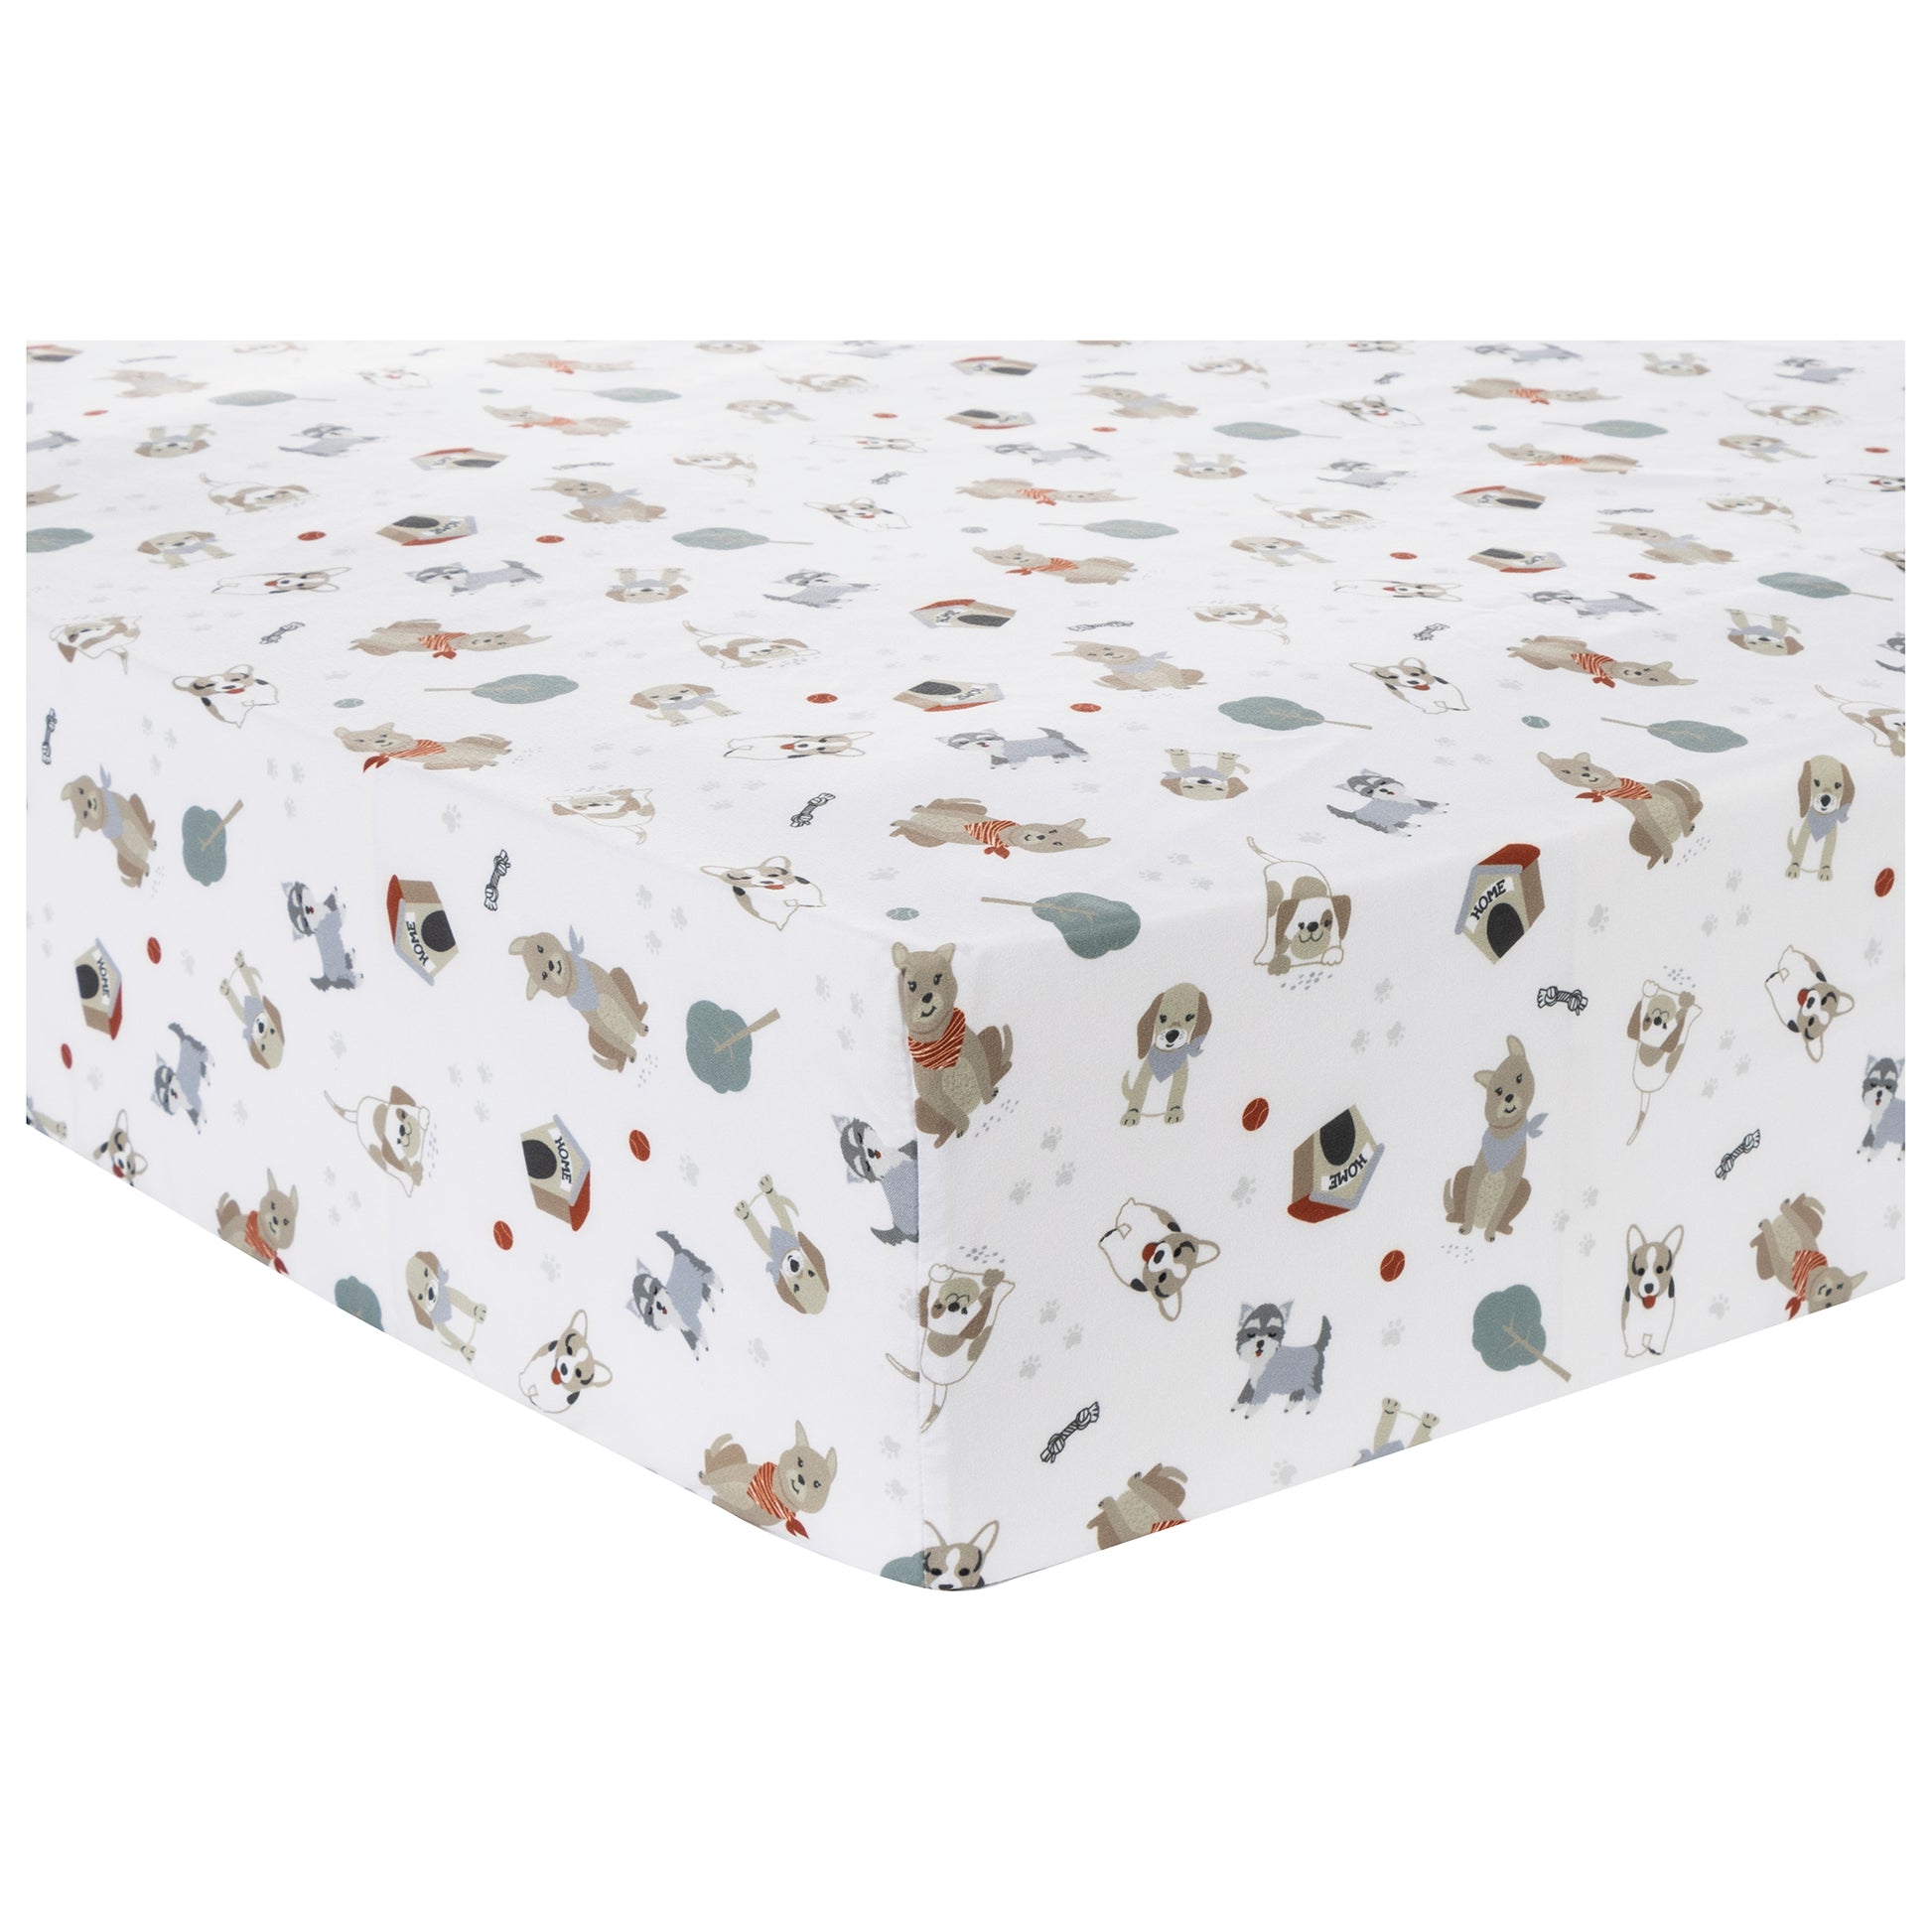 Fitted crib sheet fits standard crib mattress 28 in x 52 in with 8-inch-deep pockets and is fully elasticized for a secure fit. Crib sheet features cute dogs, paw prints, dog toys and trees.